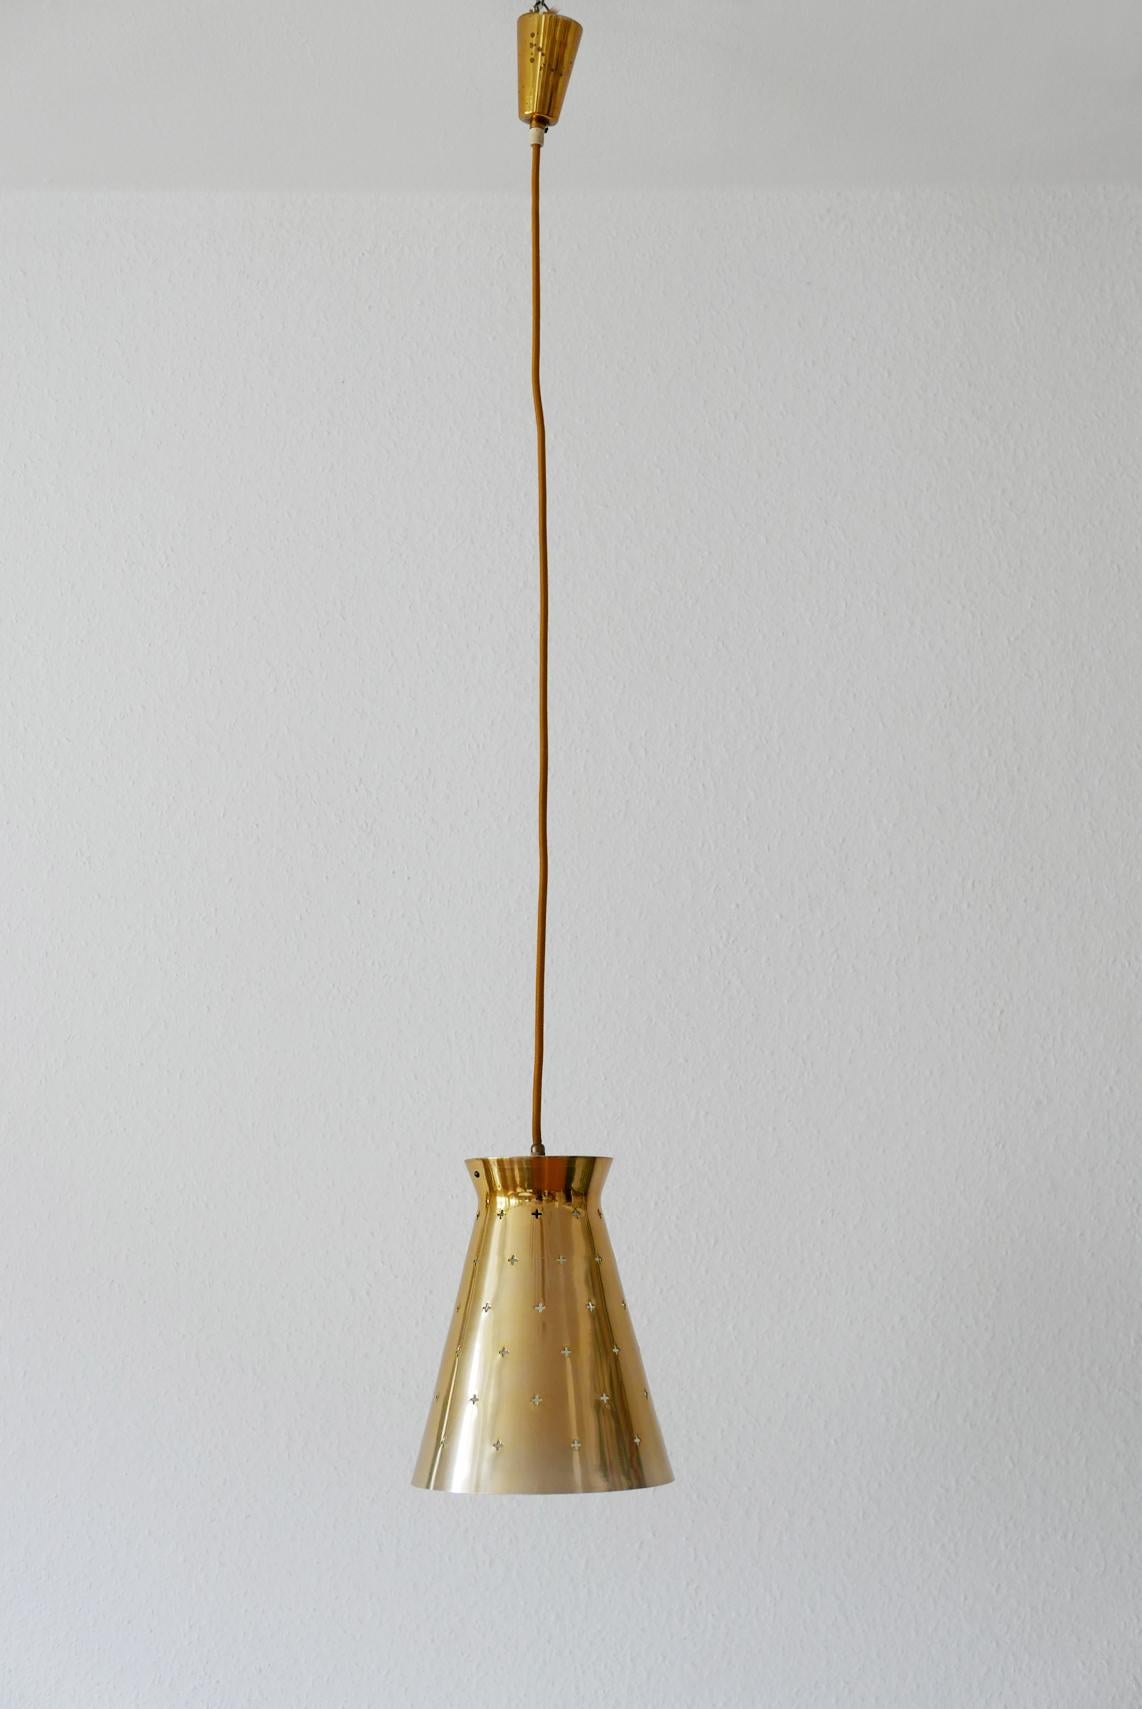 Anodized Lovely Mid-Century Modern Diabolo Pendant Lamp by Hillebrand, 1950s, Germany For Sale